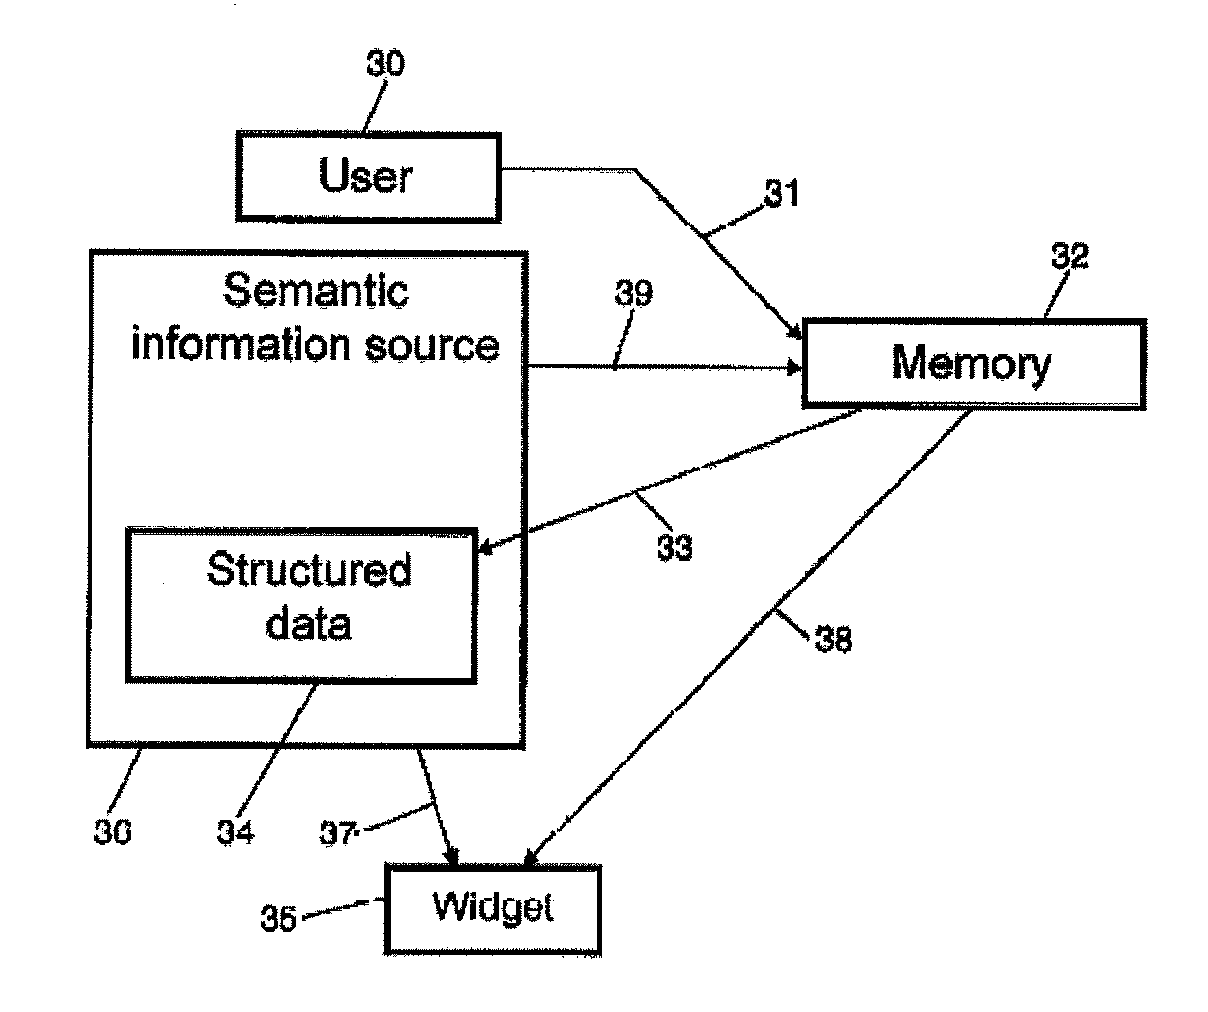 Method for  establishing a relationship between semantic data and the running of a widget